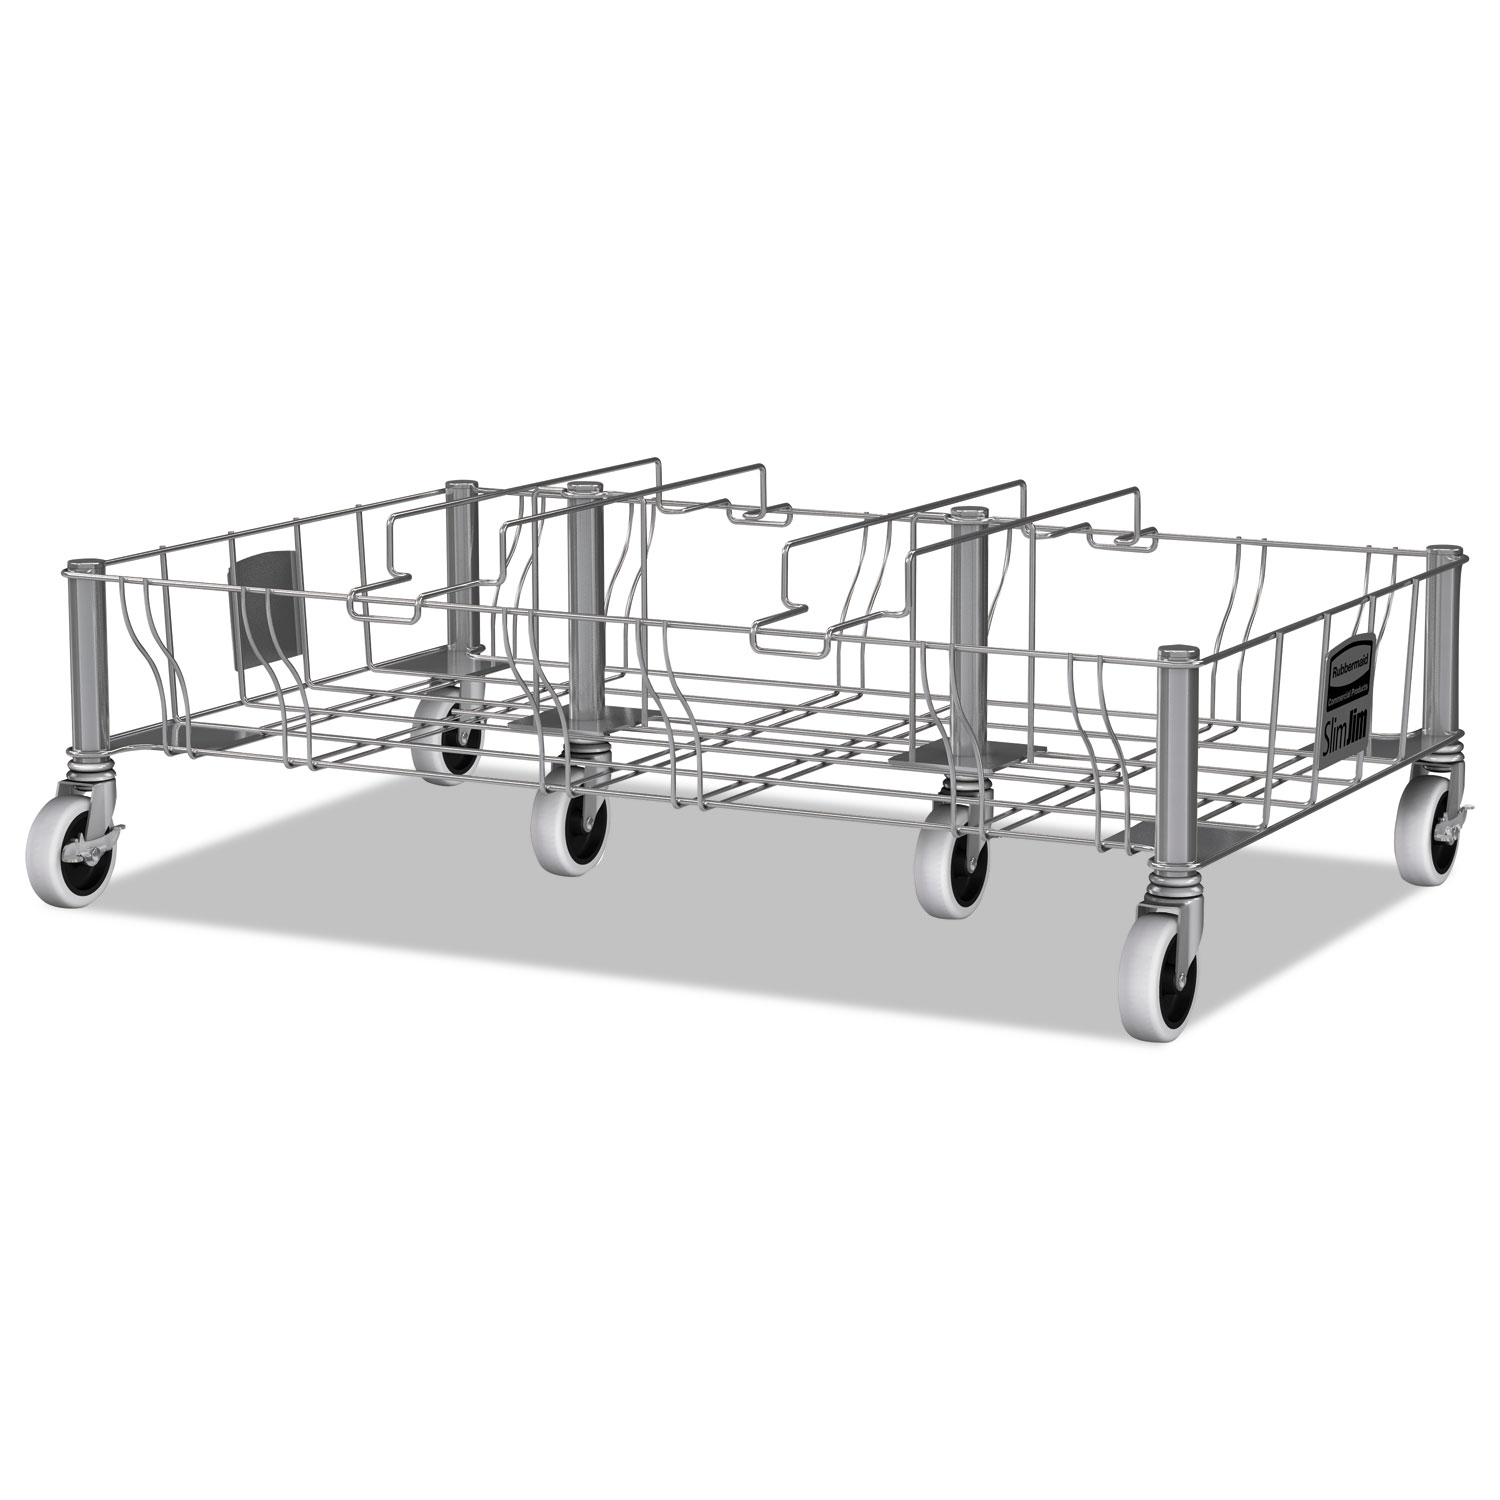  Rubbermaid Commercial 1956192 Slim Jim Steel Dolly, 300 lb Capacity, 20 x 32.5 x 9, Stainless Steel (RCP1956192) 